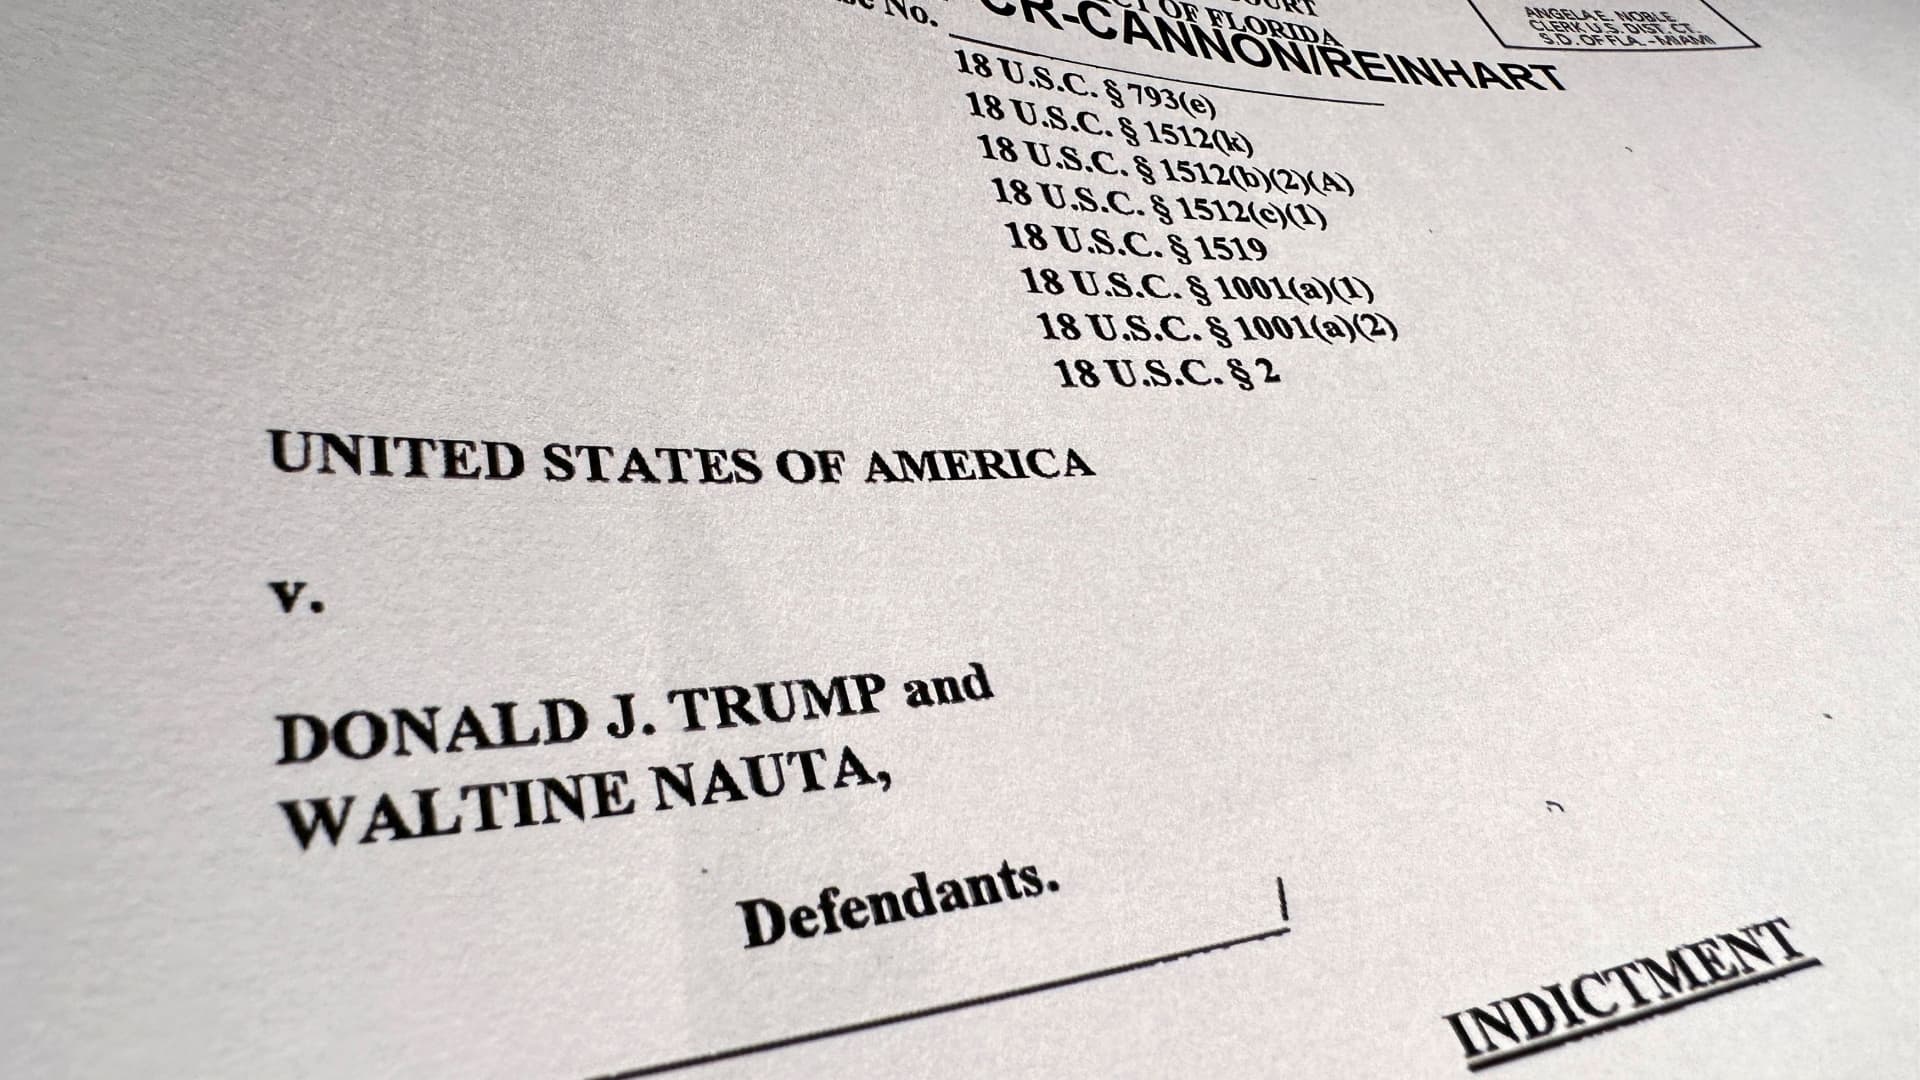 The first page of the U.S. Justice Department's charging document against former U.S. President Donald Trump, charging him with 37 criminal counts, including charges of unauthorized retention of classified documents and conspiracy to obstruct justice after leaving the White House, is seen after being released by the Justice Department in Washington, U.S. June 9, 2023. 